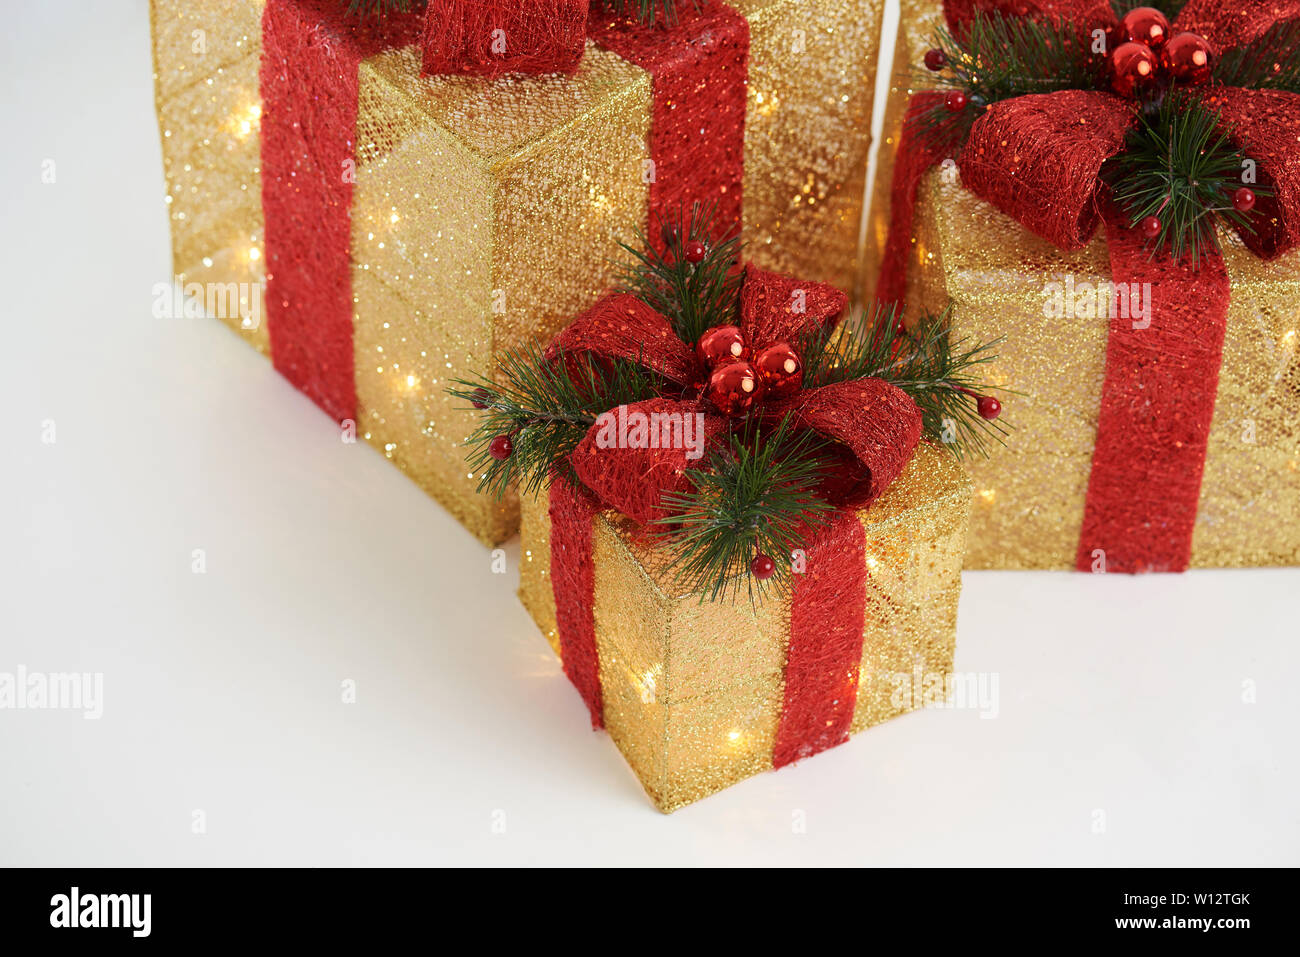 Gift boxes background. Gold glowing Christmas  decorated presents. Stock Photo